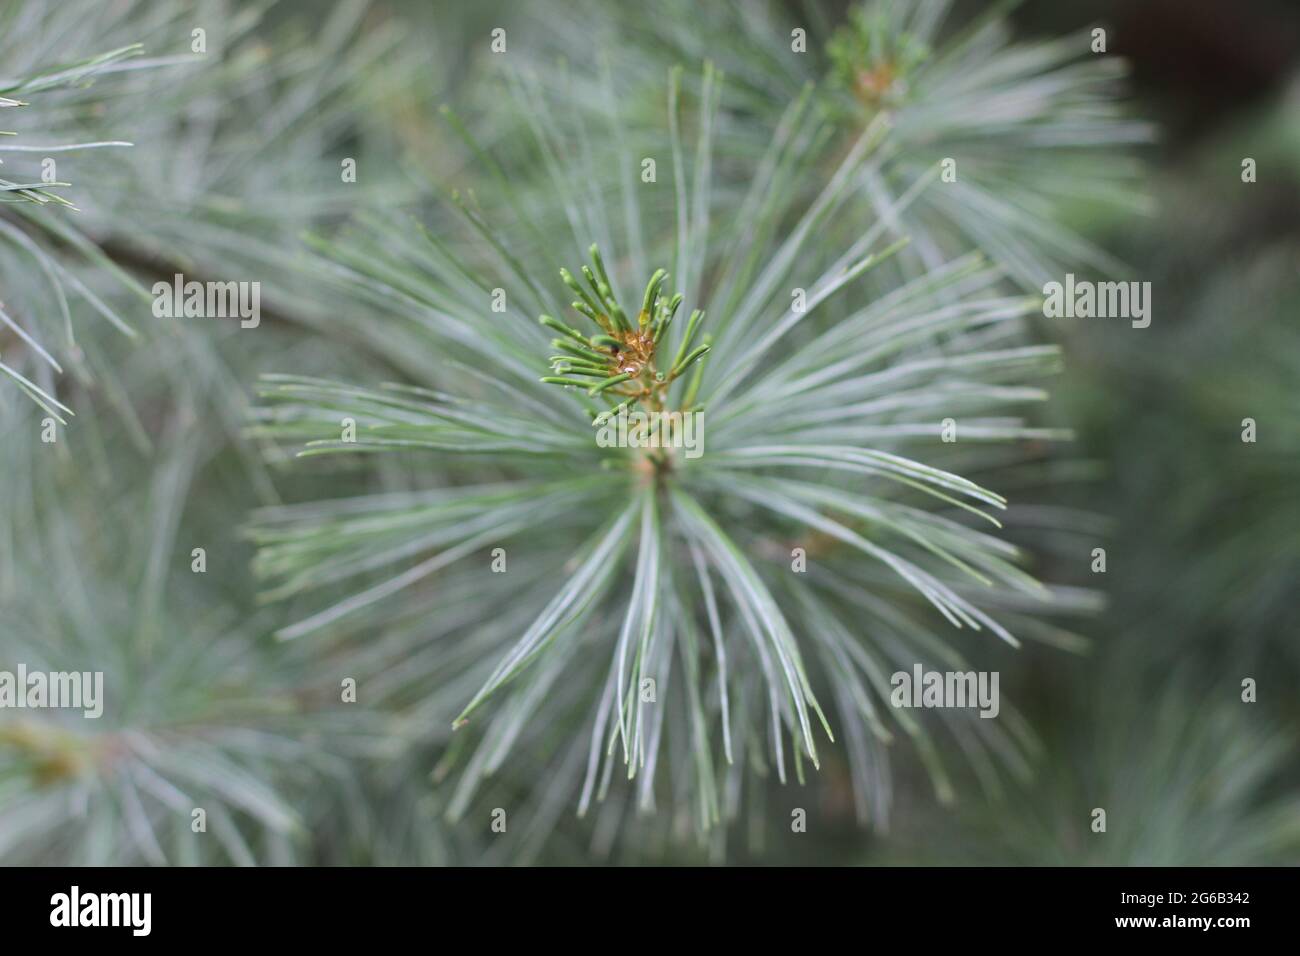 Closeup of tips of pine tree branches Stock Photo